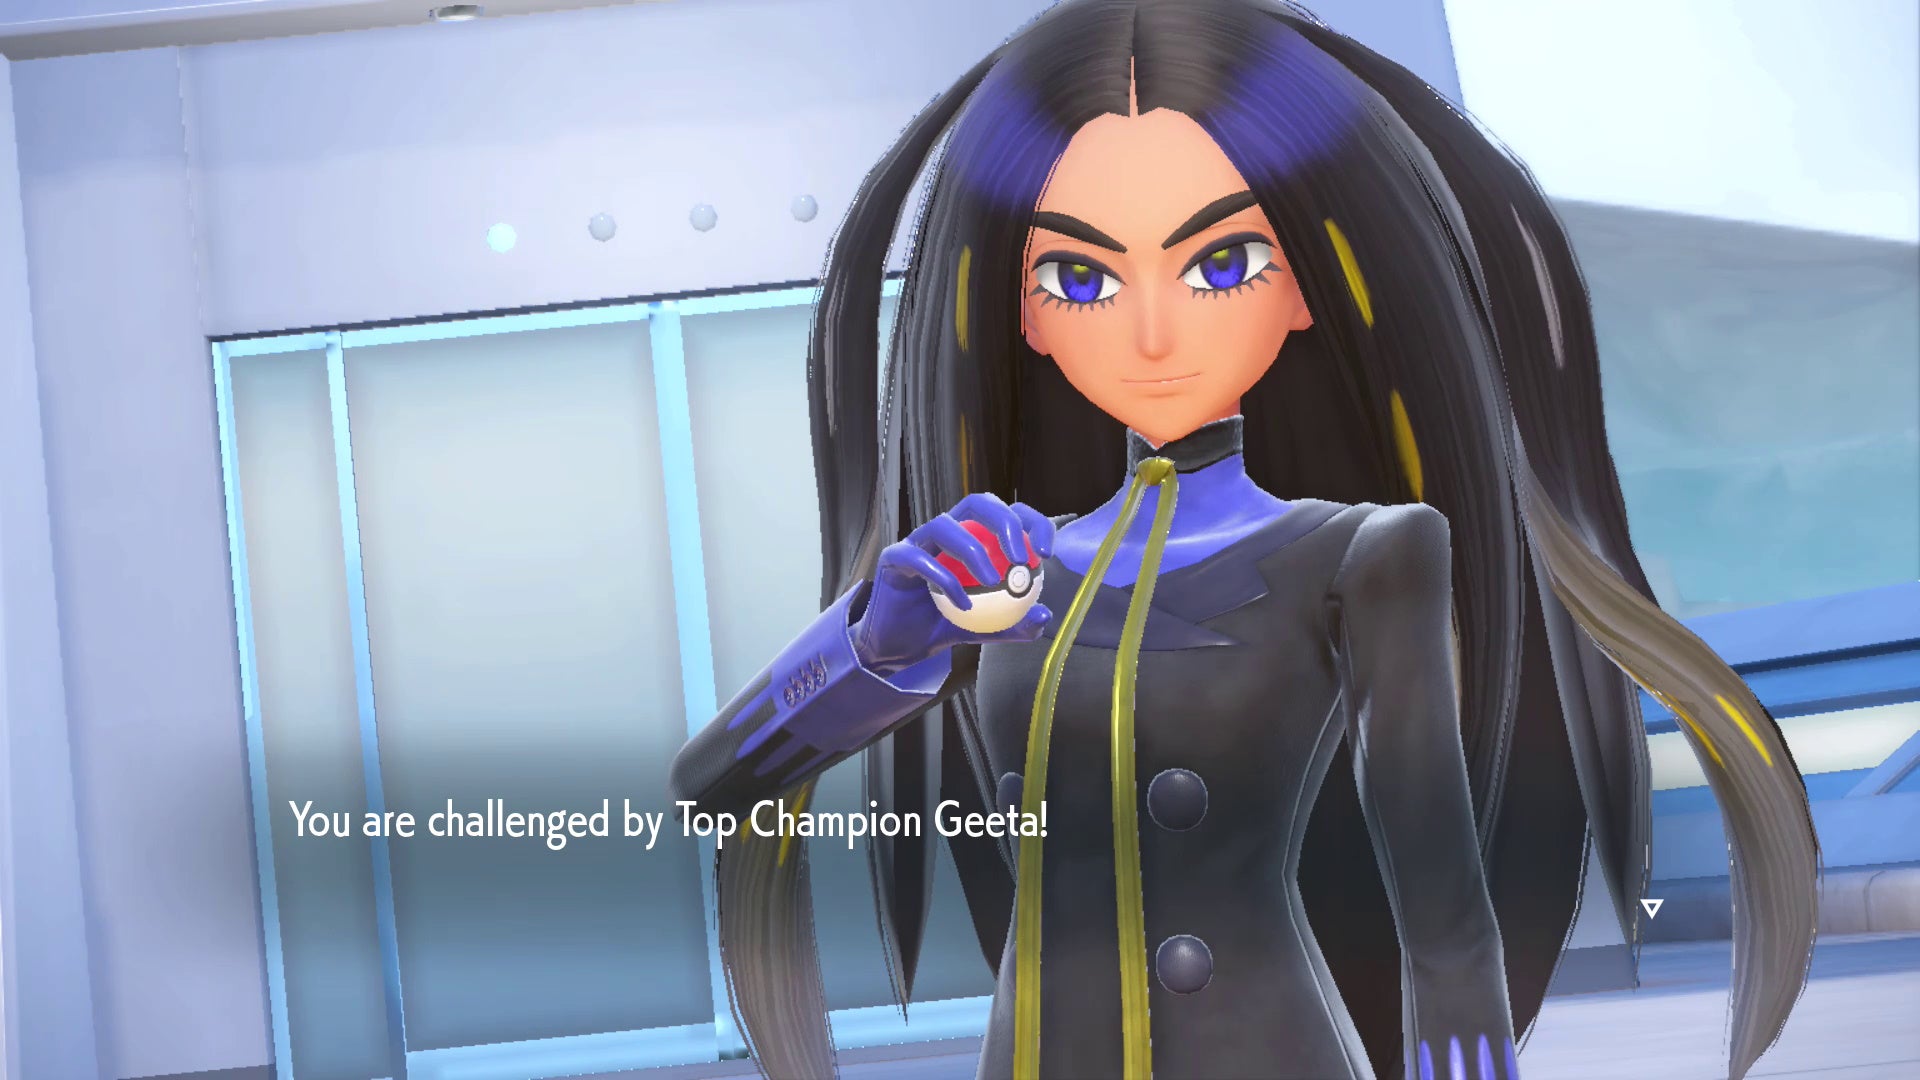 How-to-beat-Top-Champion-Geeta-in-Pokémon-Scarlet-and-Violet-3.jpg